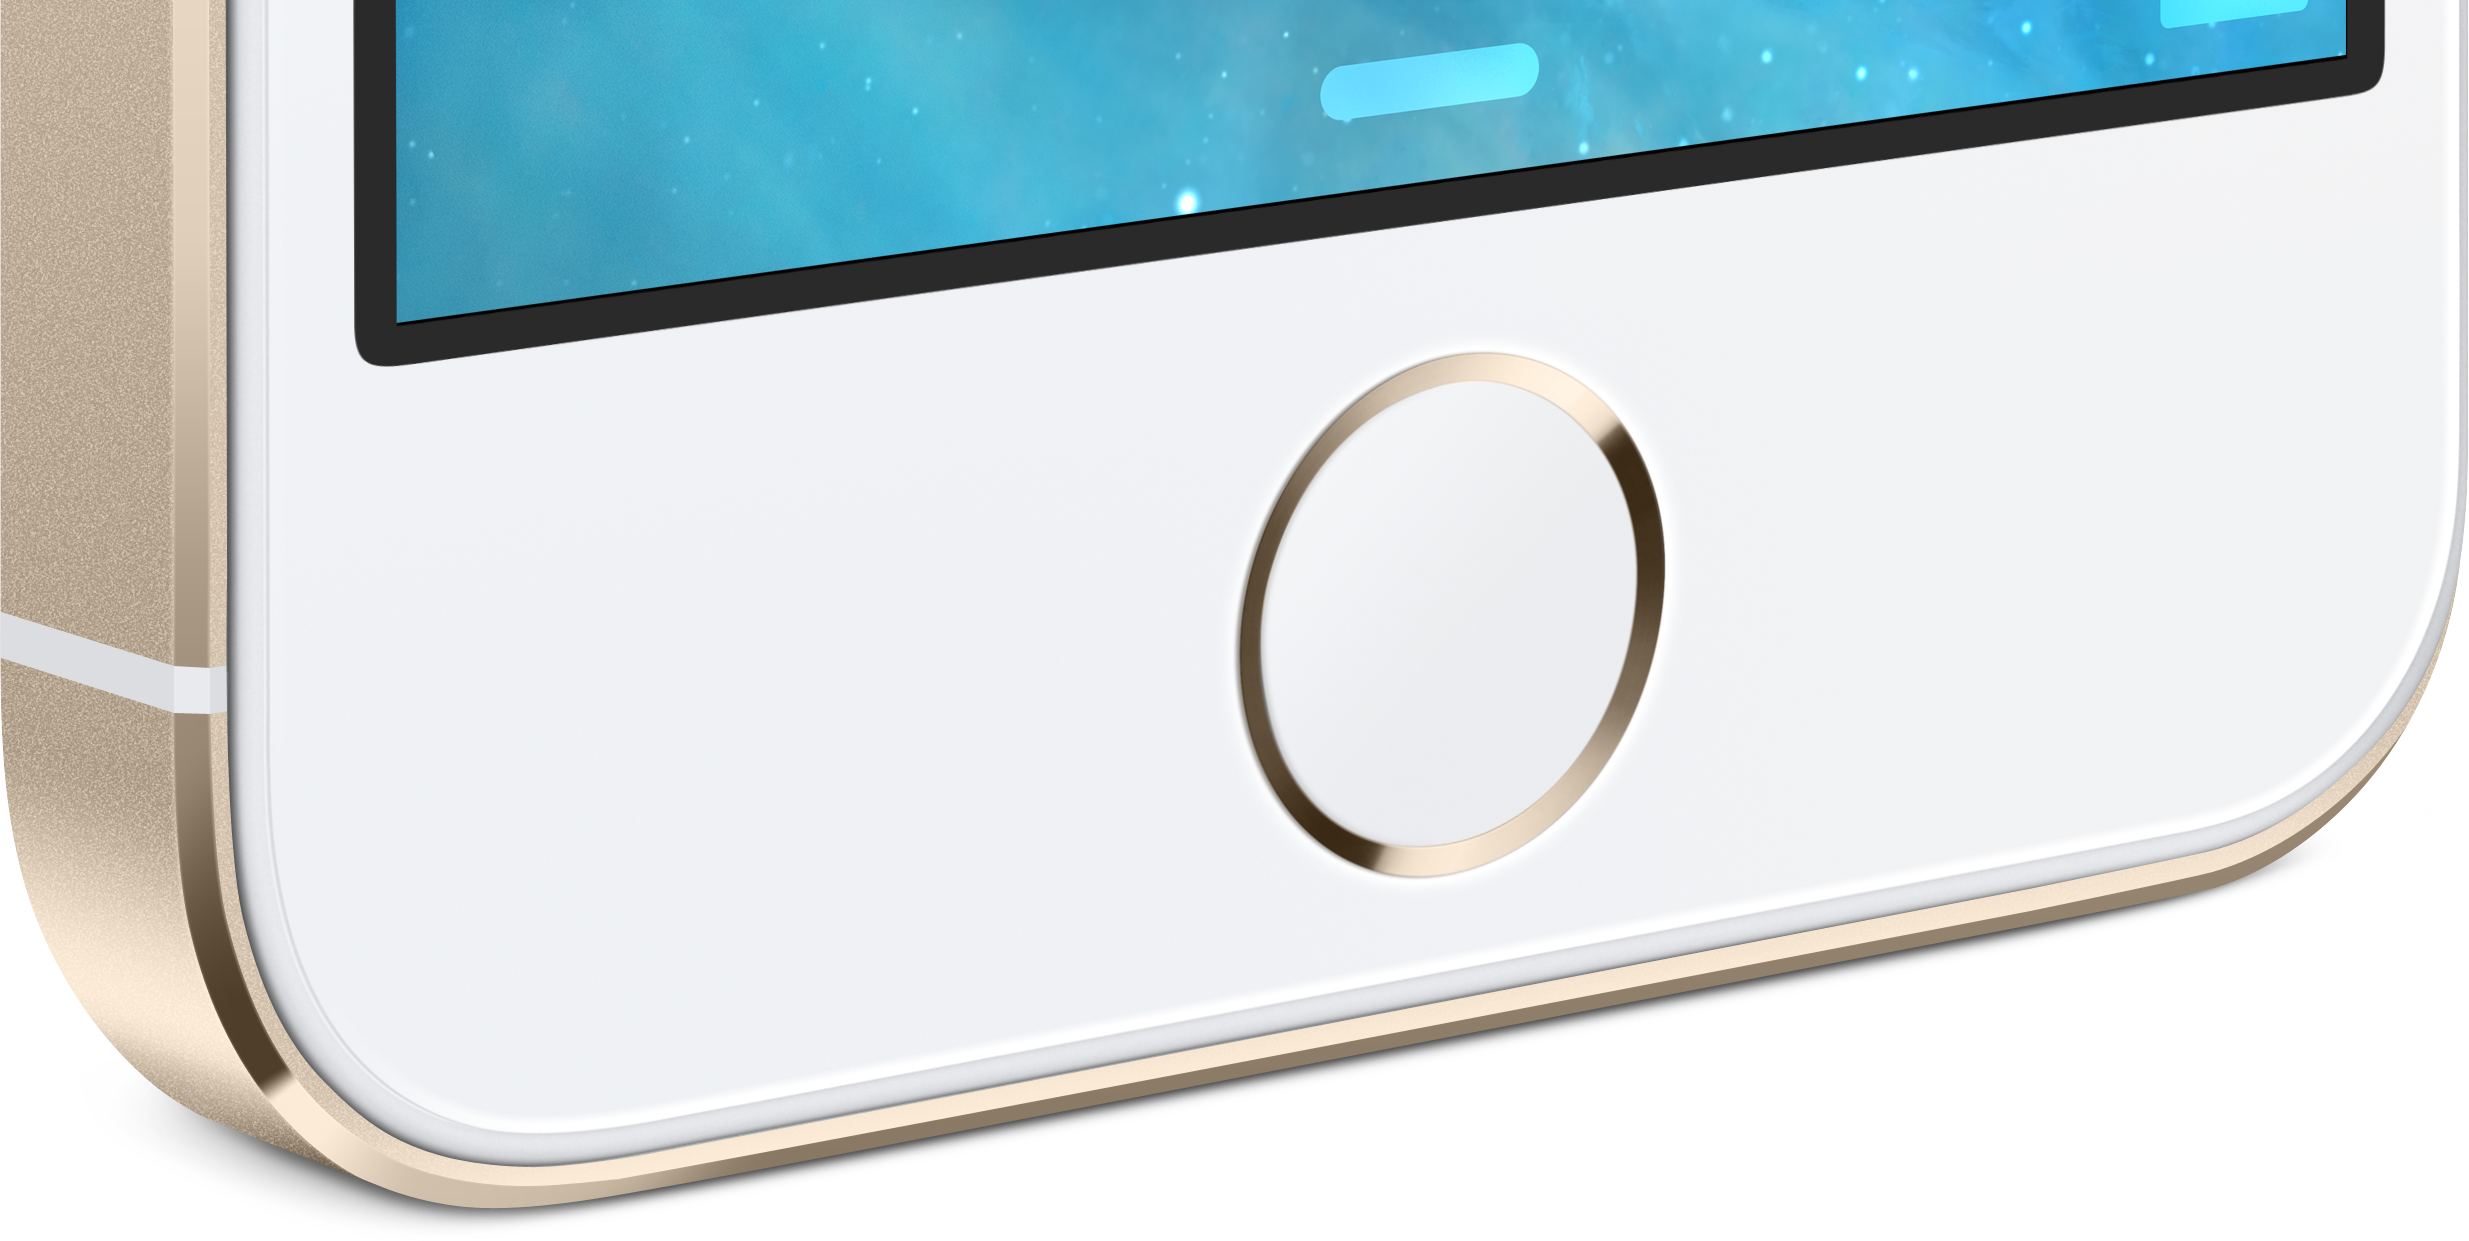 Close on Touch ID - iPhone 5s Home button